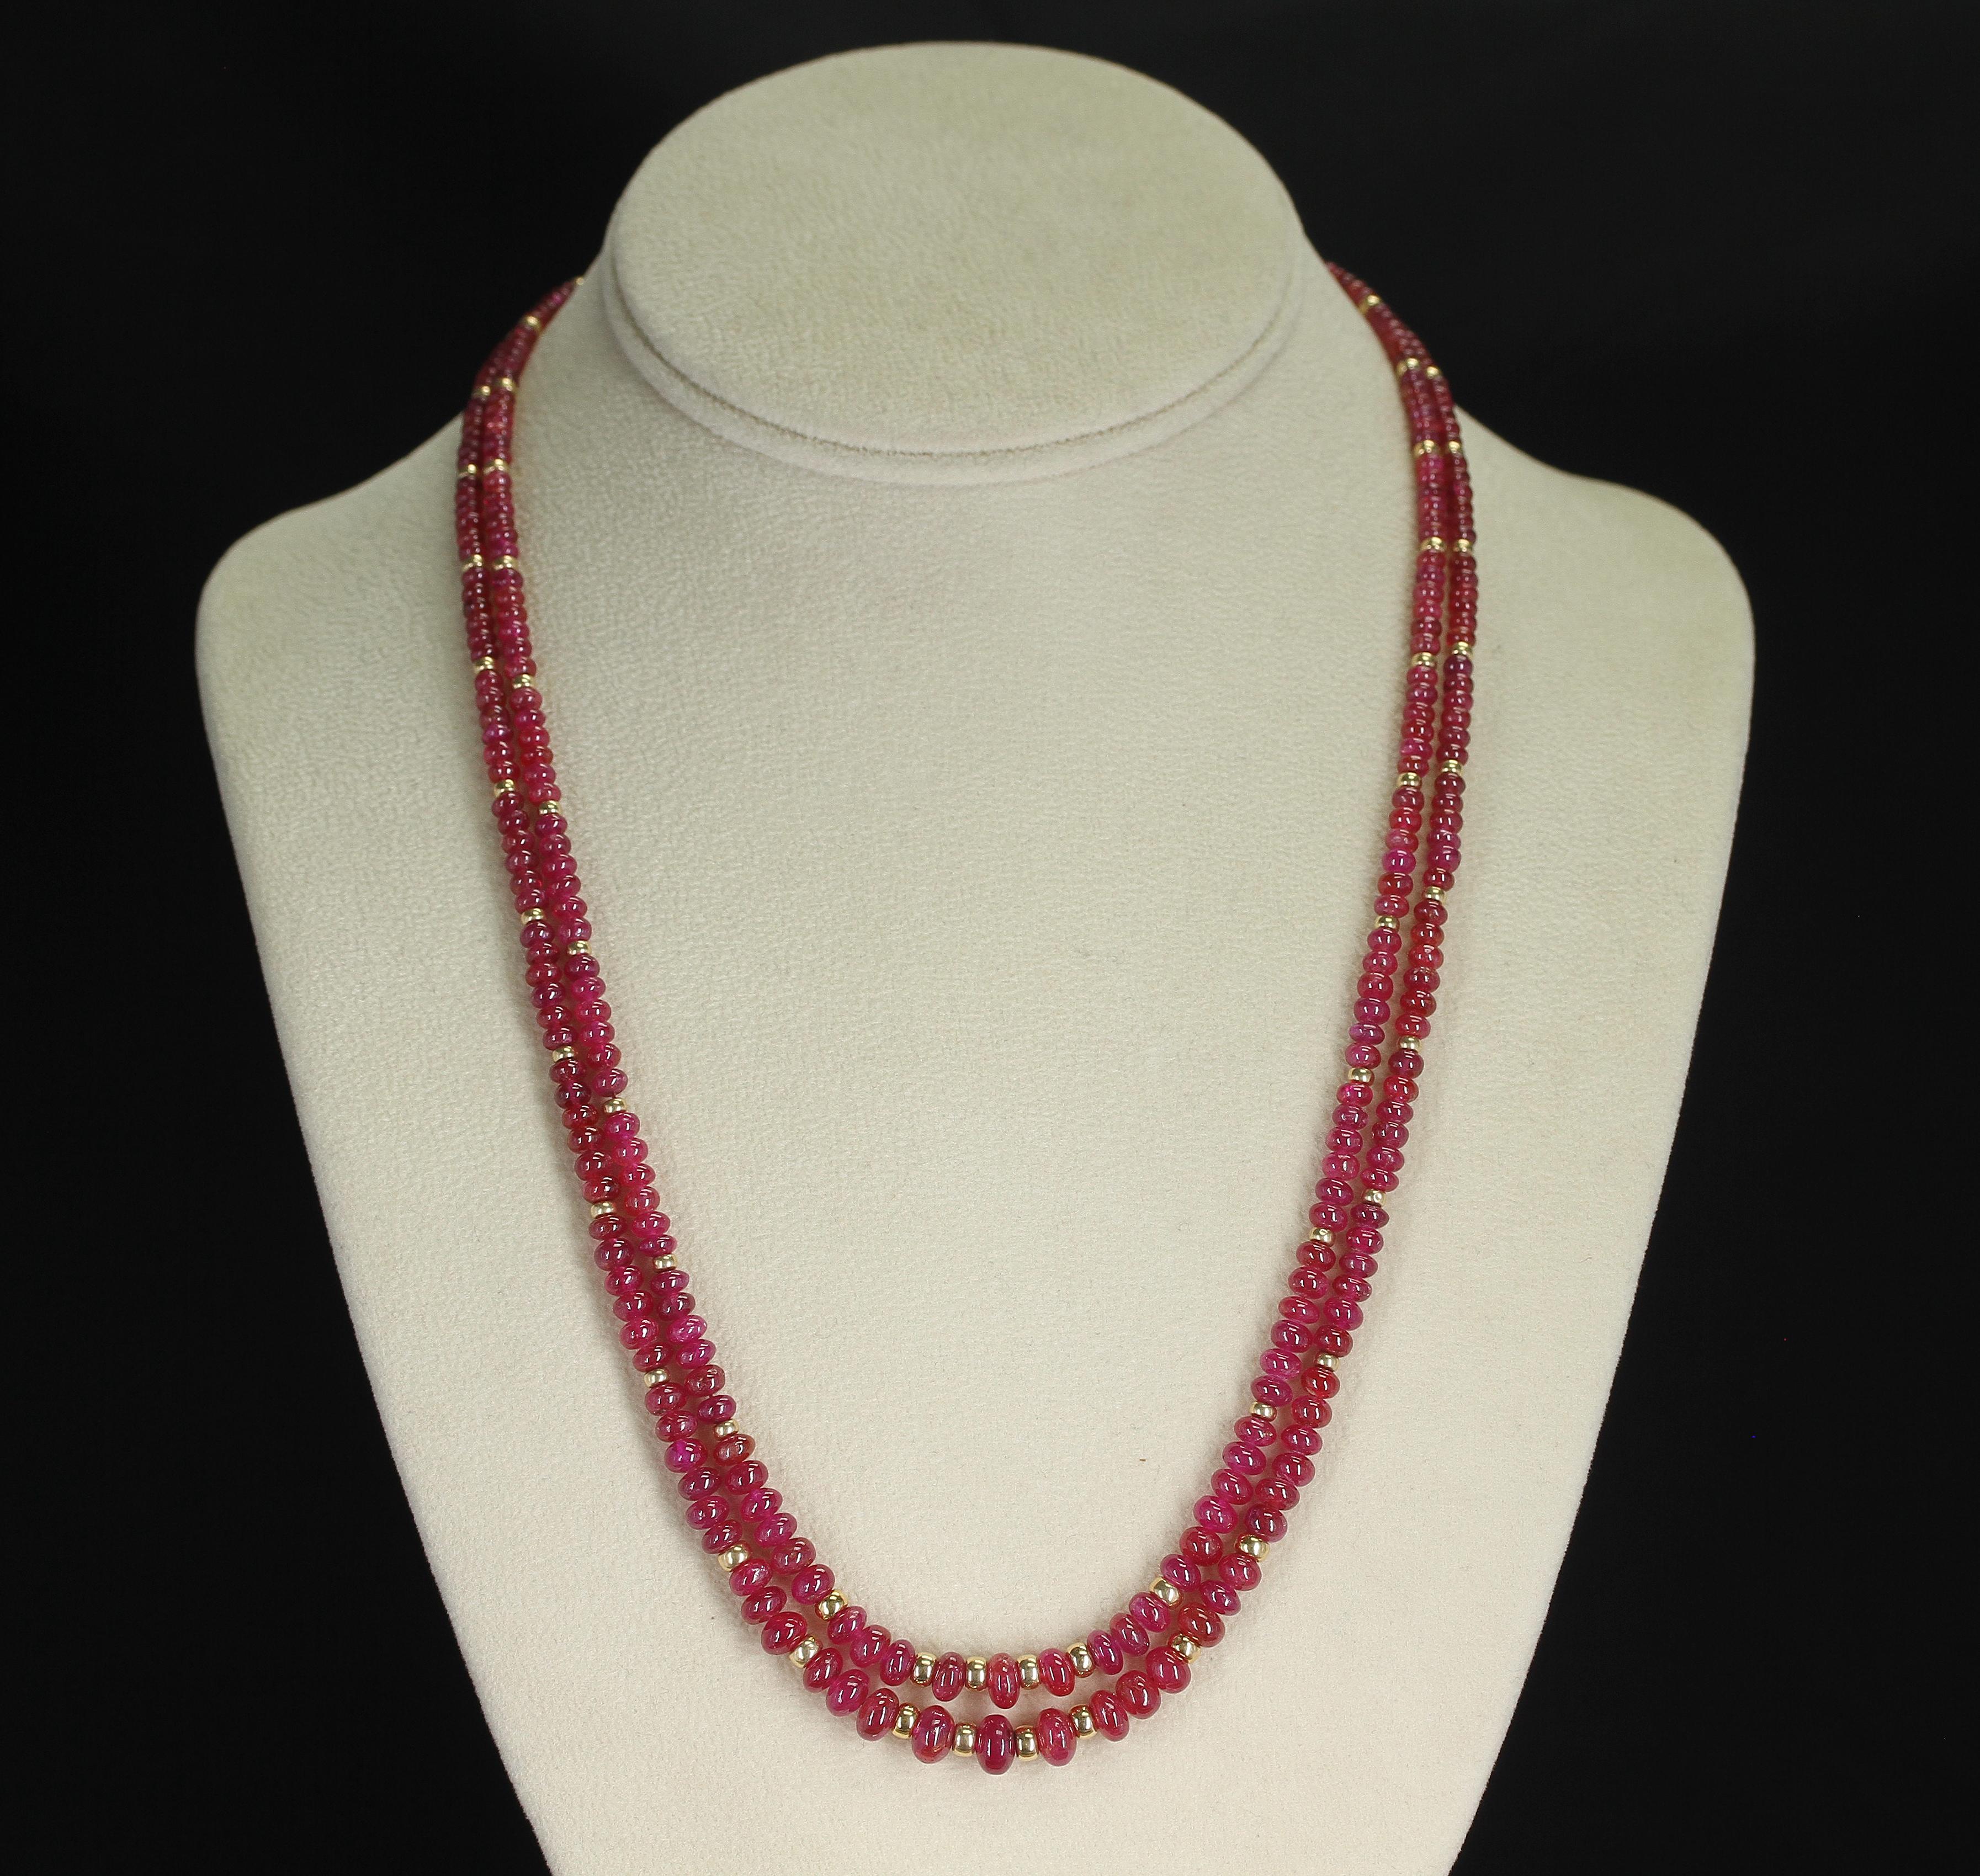 A necklace consisting of two strands of smooth & plain Ruby beads with 14K Gold Beads. The beads range from 2.5MM to 7MM and weigh a total of 184 carats. The clasp is 14K Yellow Gold.